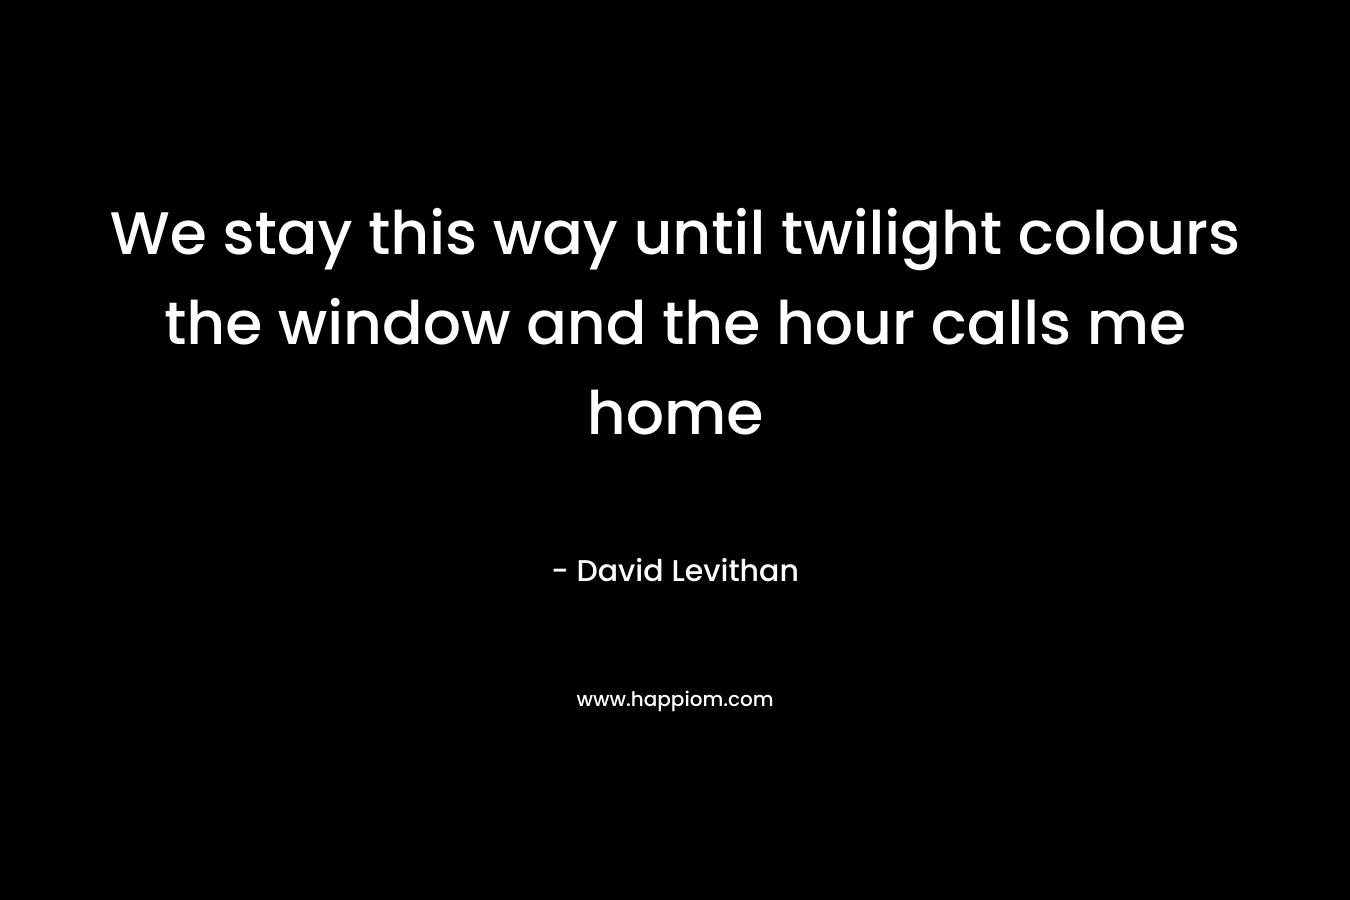 We stay this way until twilight colours the window and the hour calls me home